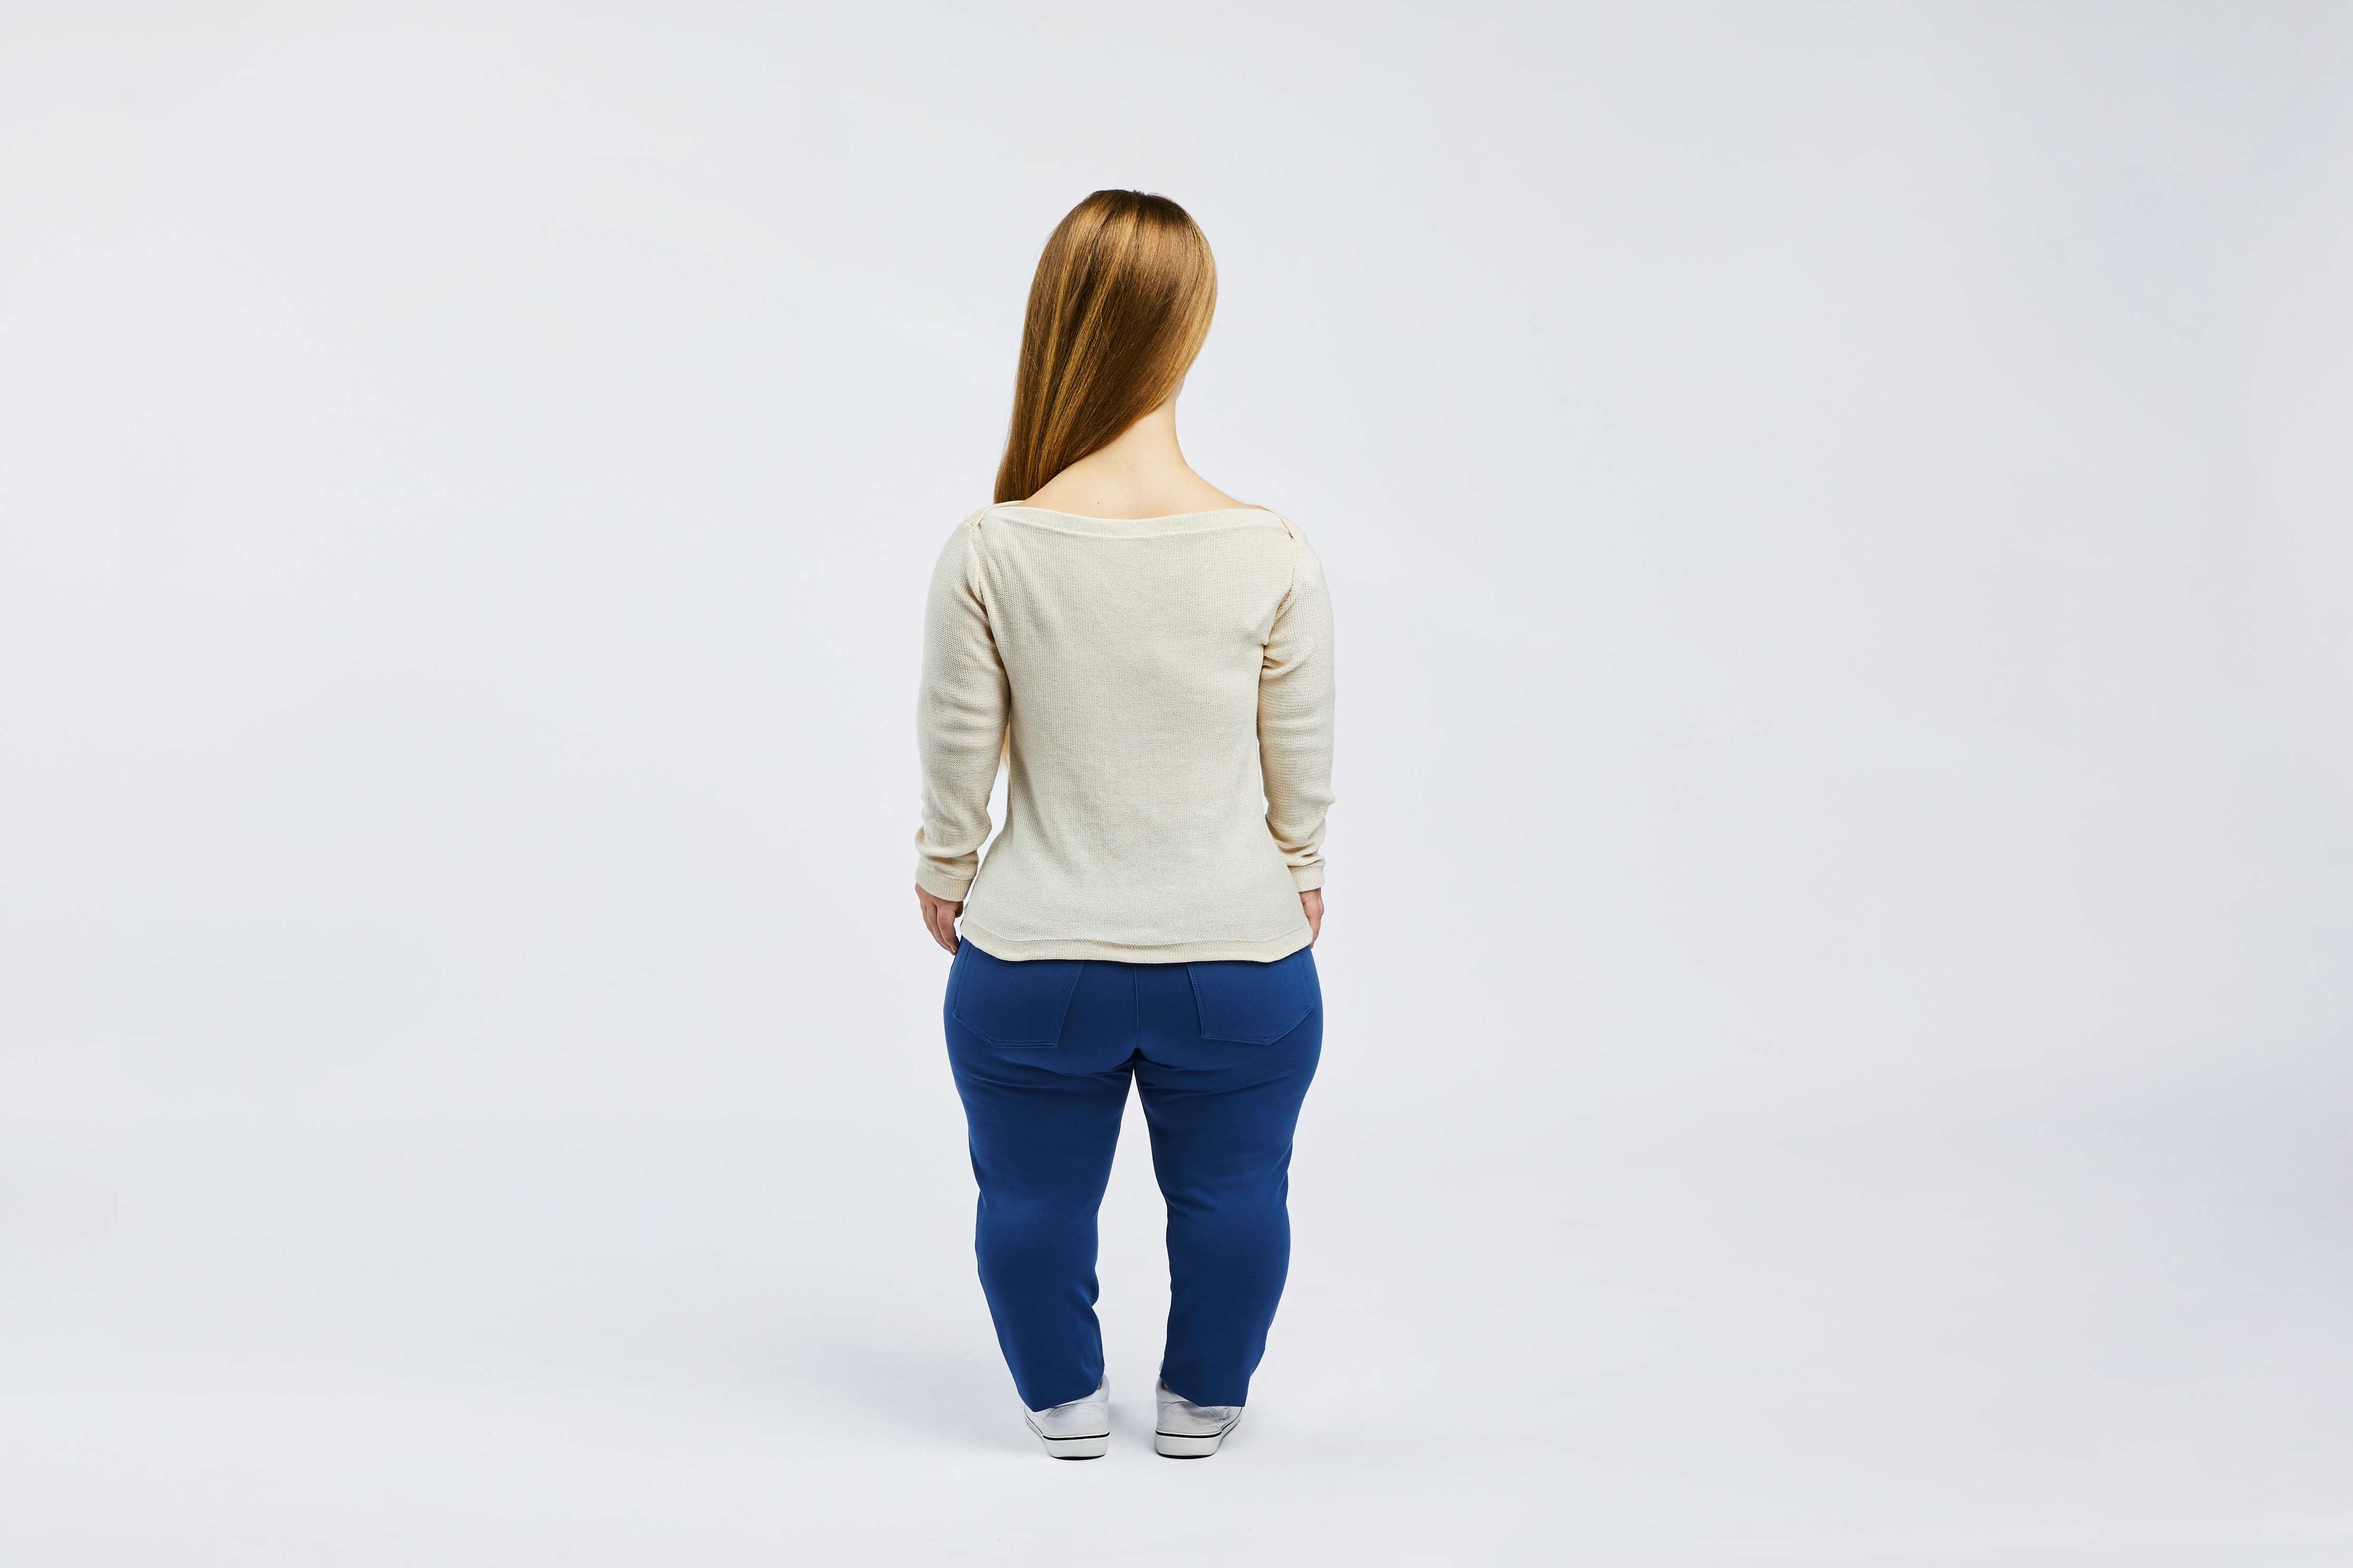 woman with dwarfism wearing white pullover 